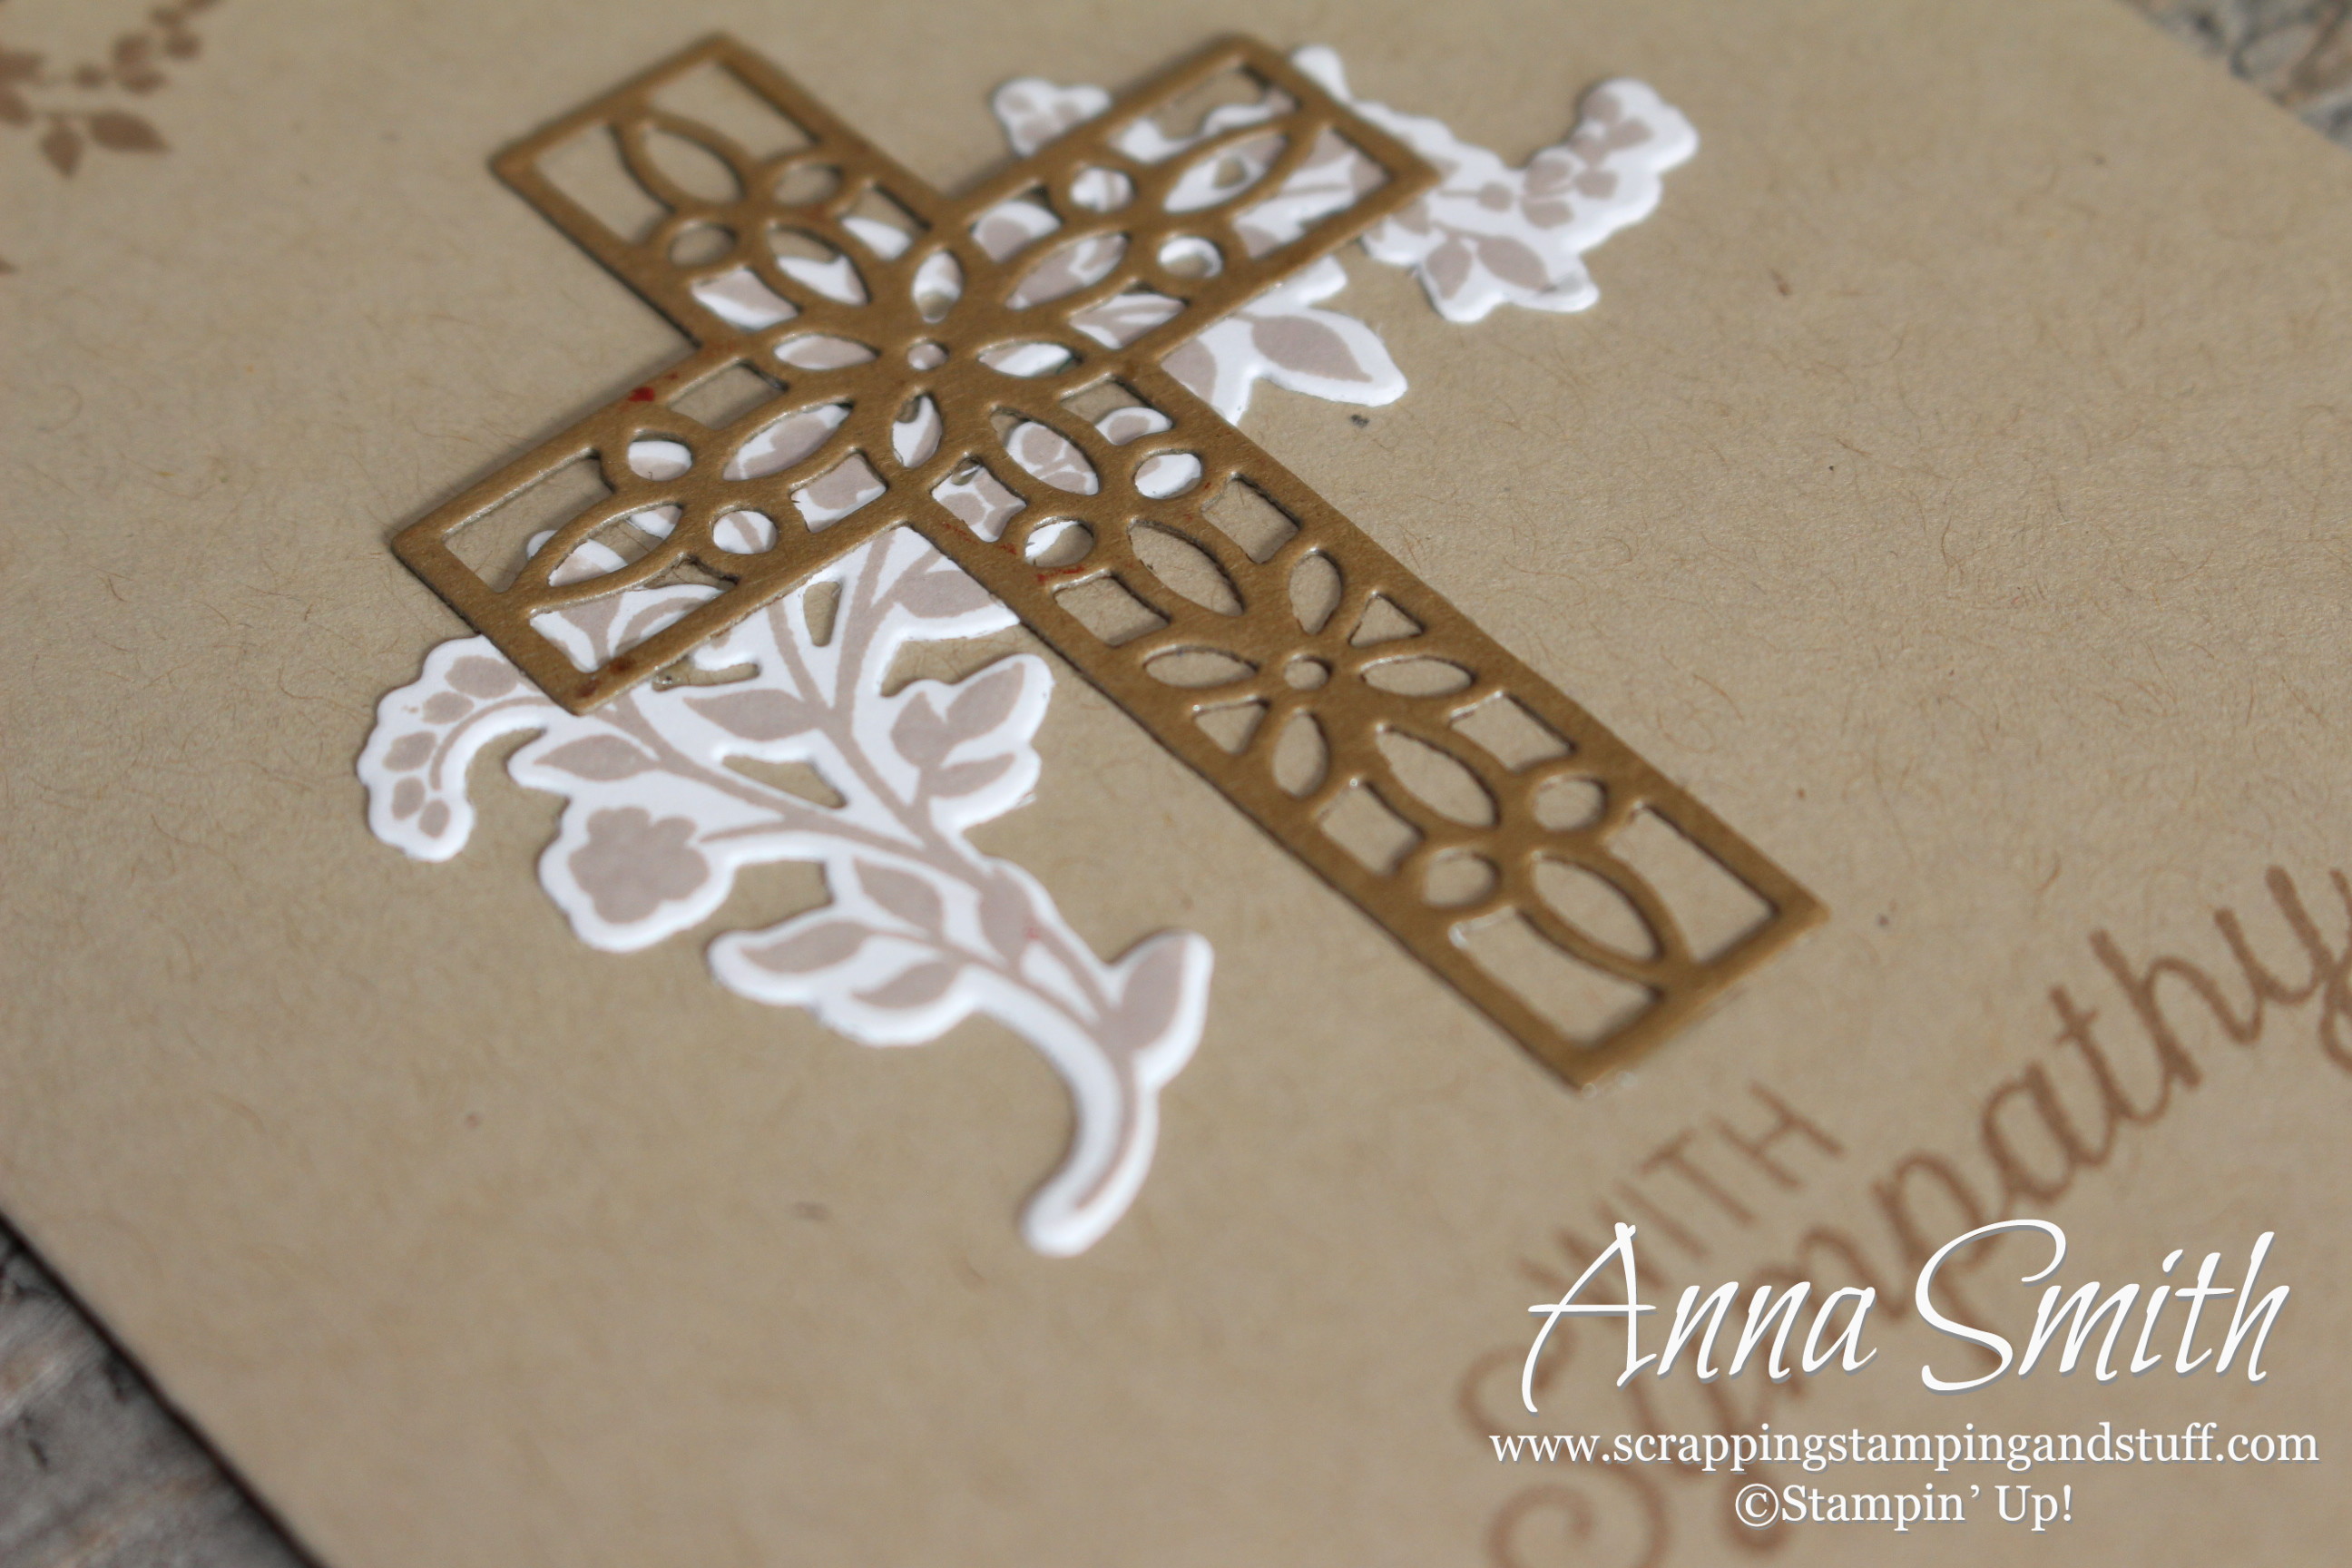 Stampin’ Up! Cross of Hope Sympathy Card